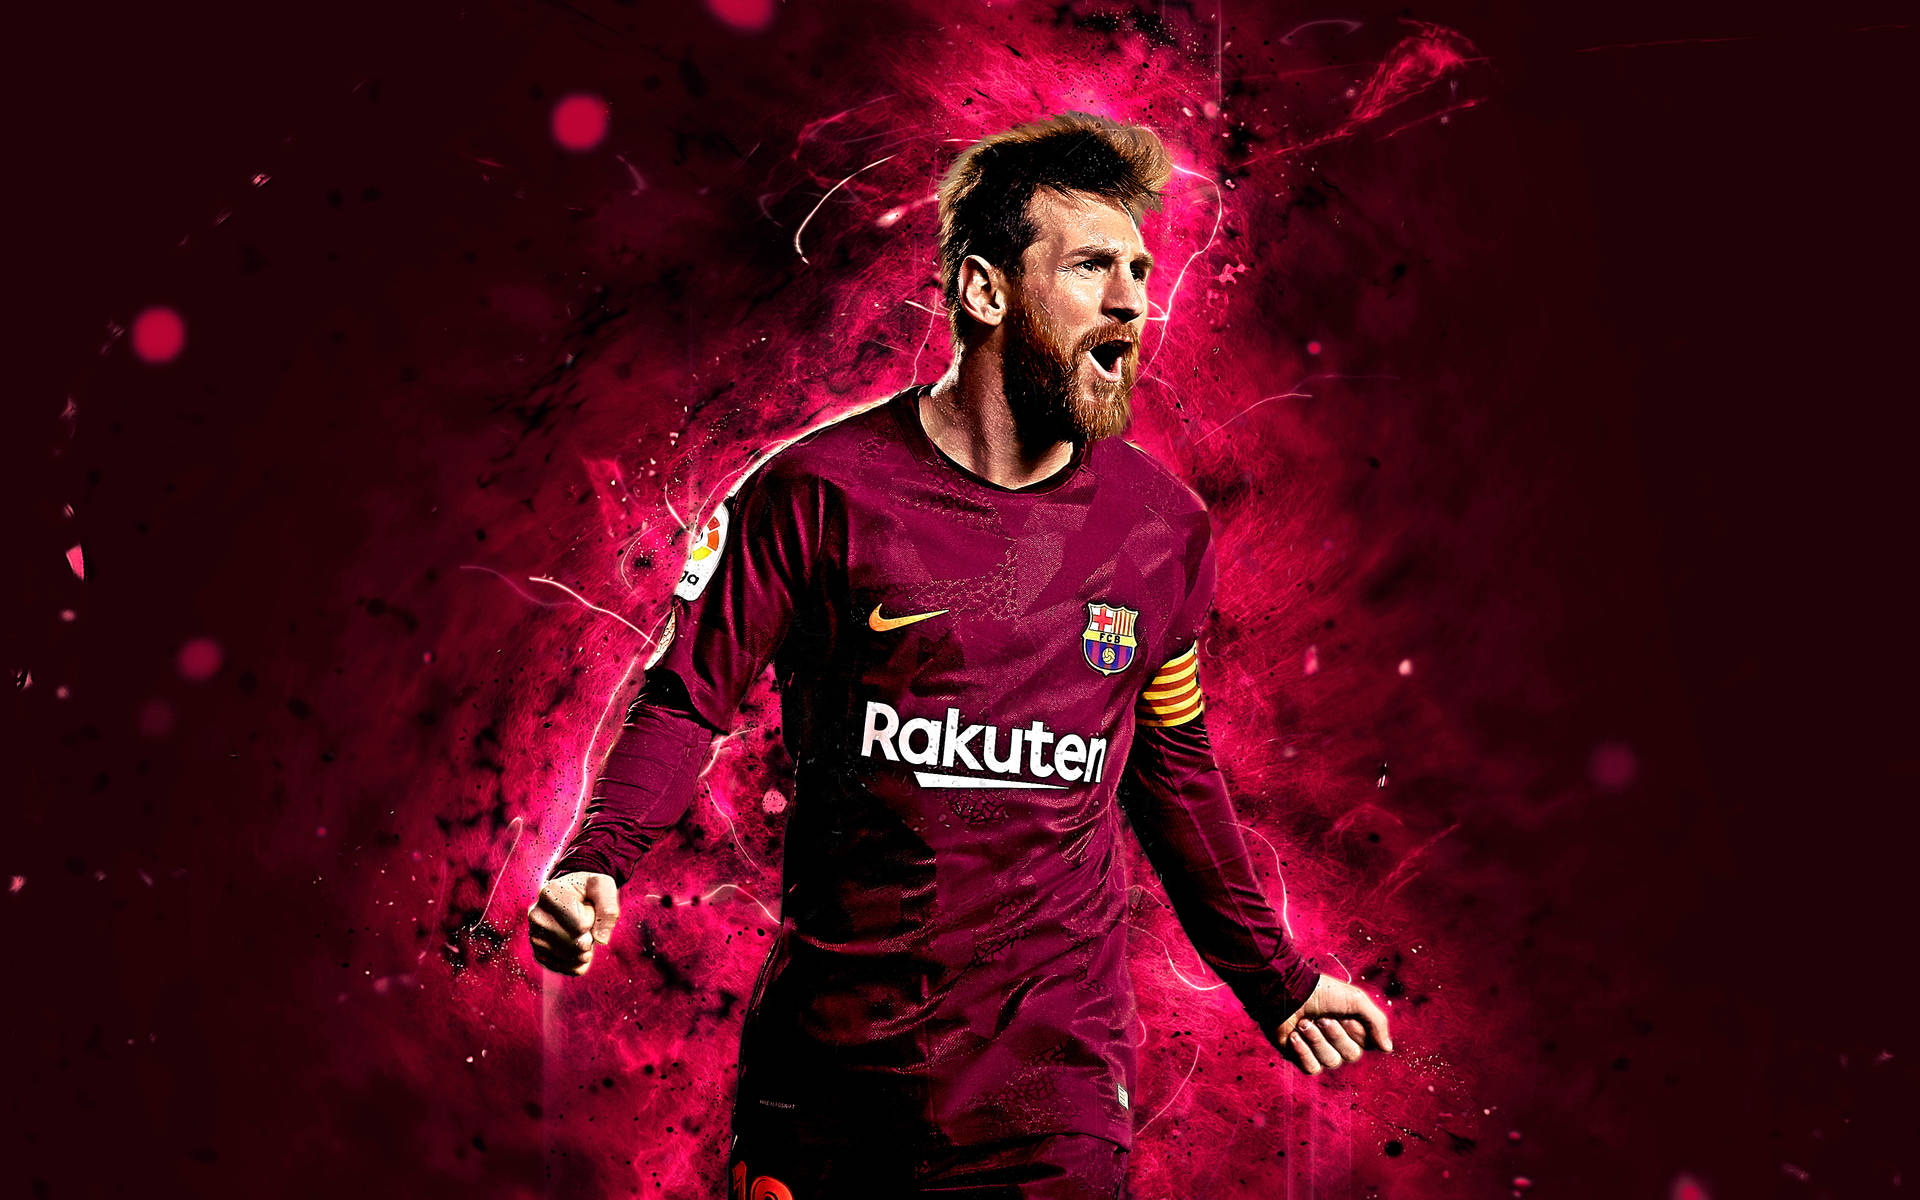 Top 999+ Messi 2020 Wallpaper Full HD, 4K✅Free to Use